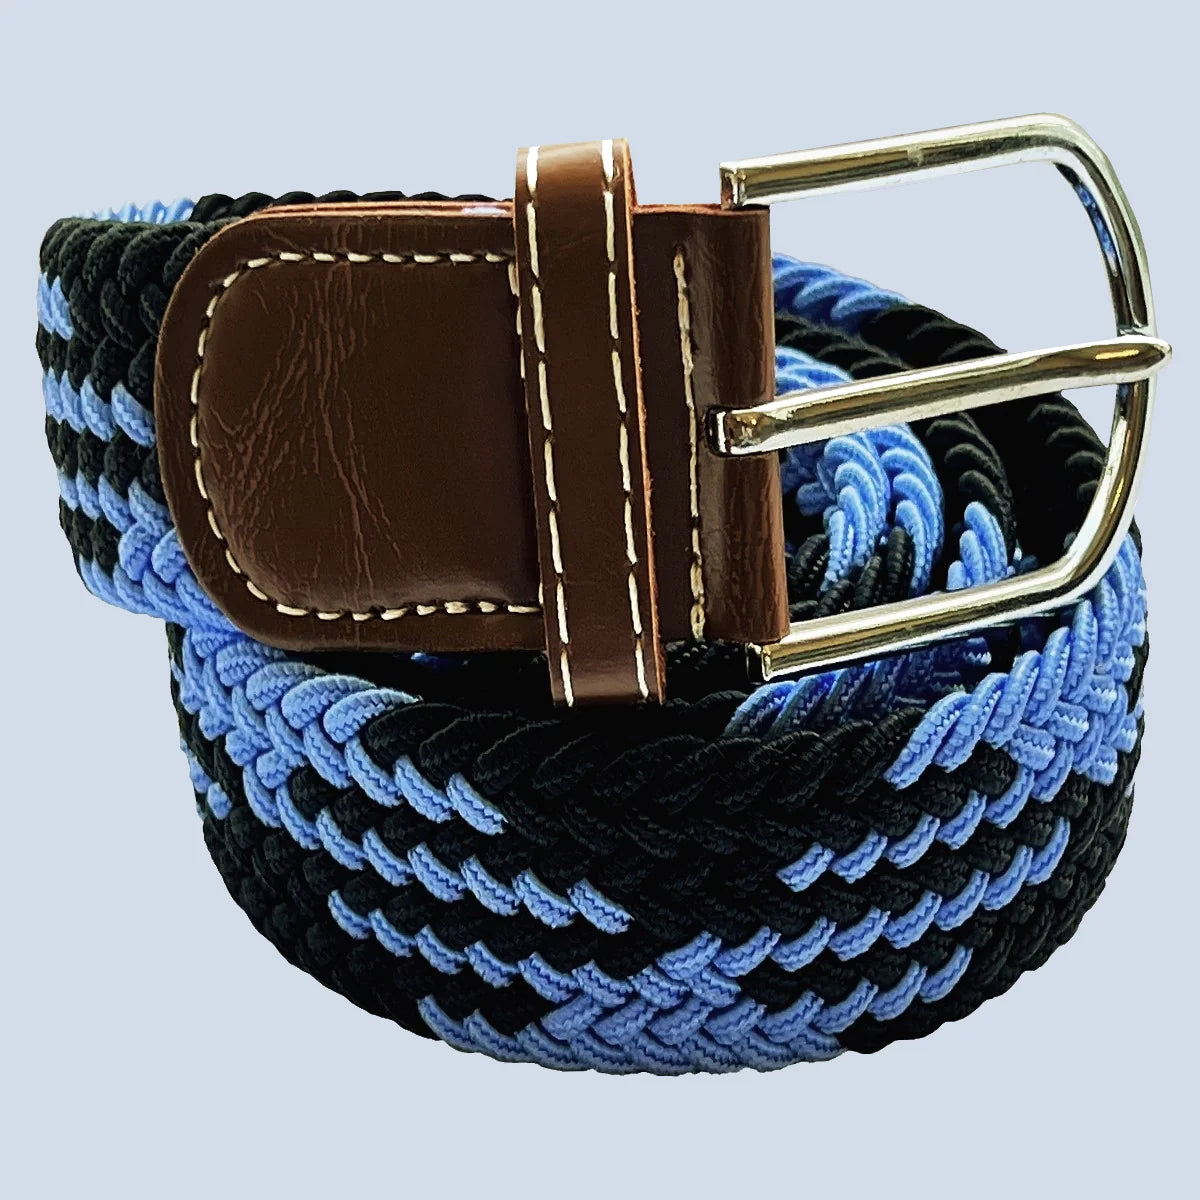 Men's Jagged Stripe Woven Belt - French Blue and Black